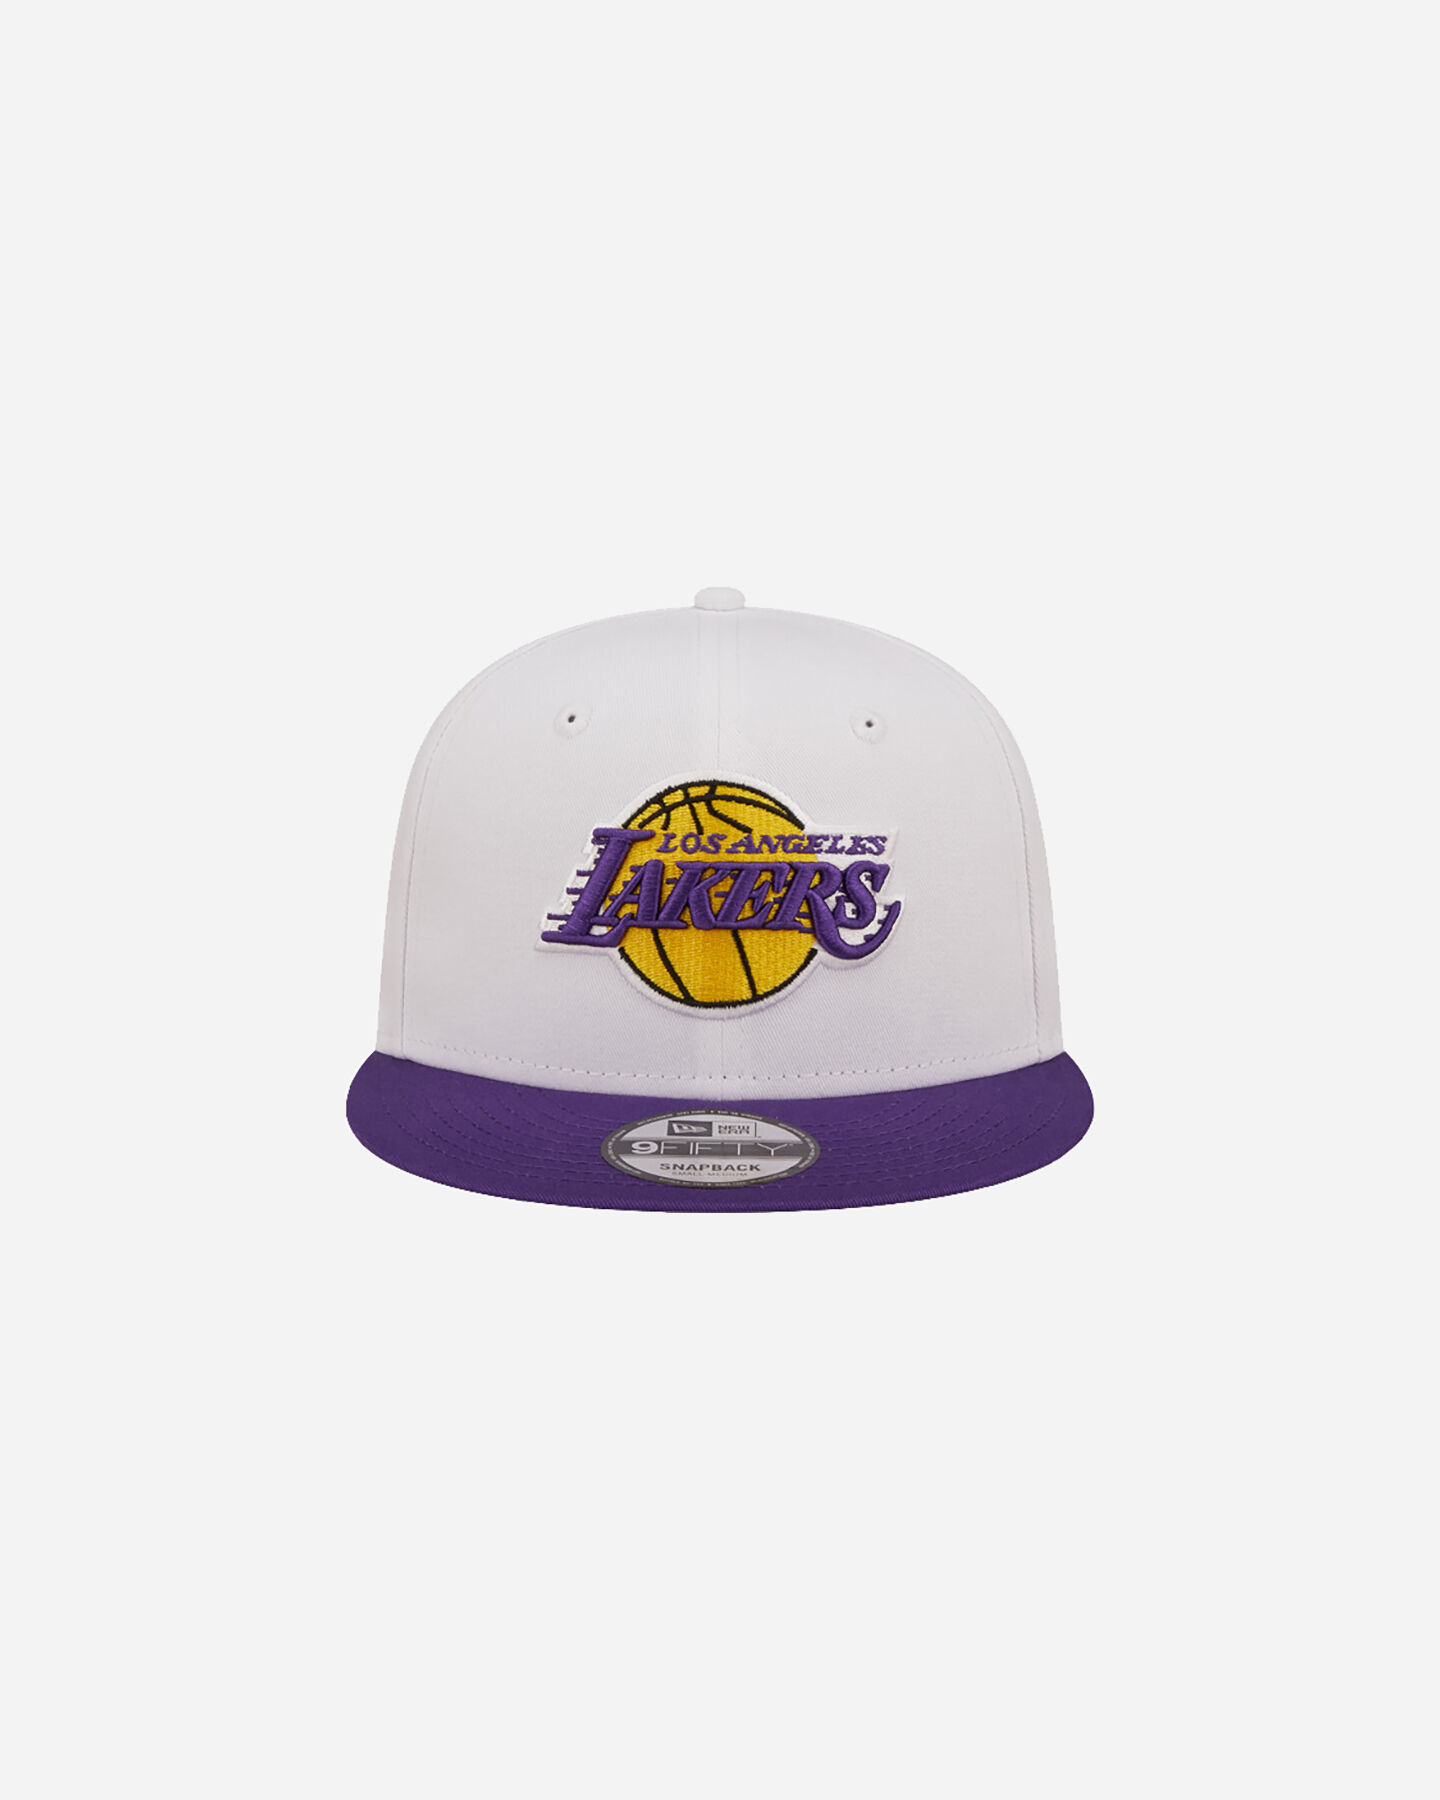  Cappellino NEW ERA 9FIFTY CROWN TEAM LOS LAKERS  S5571083|100|SM scatto 1